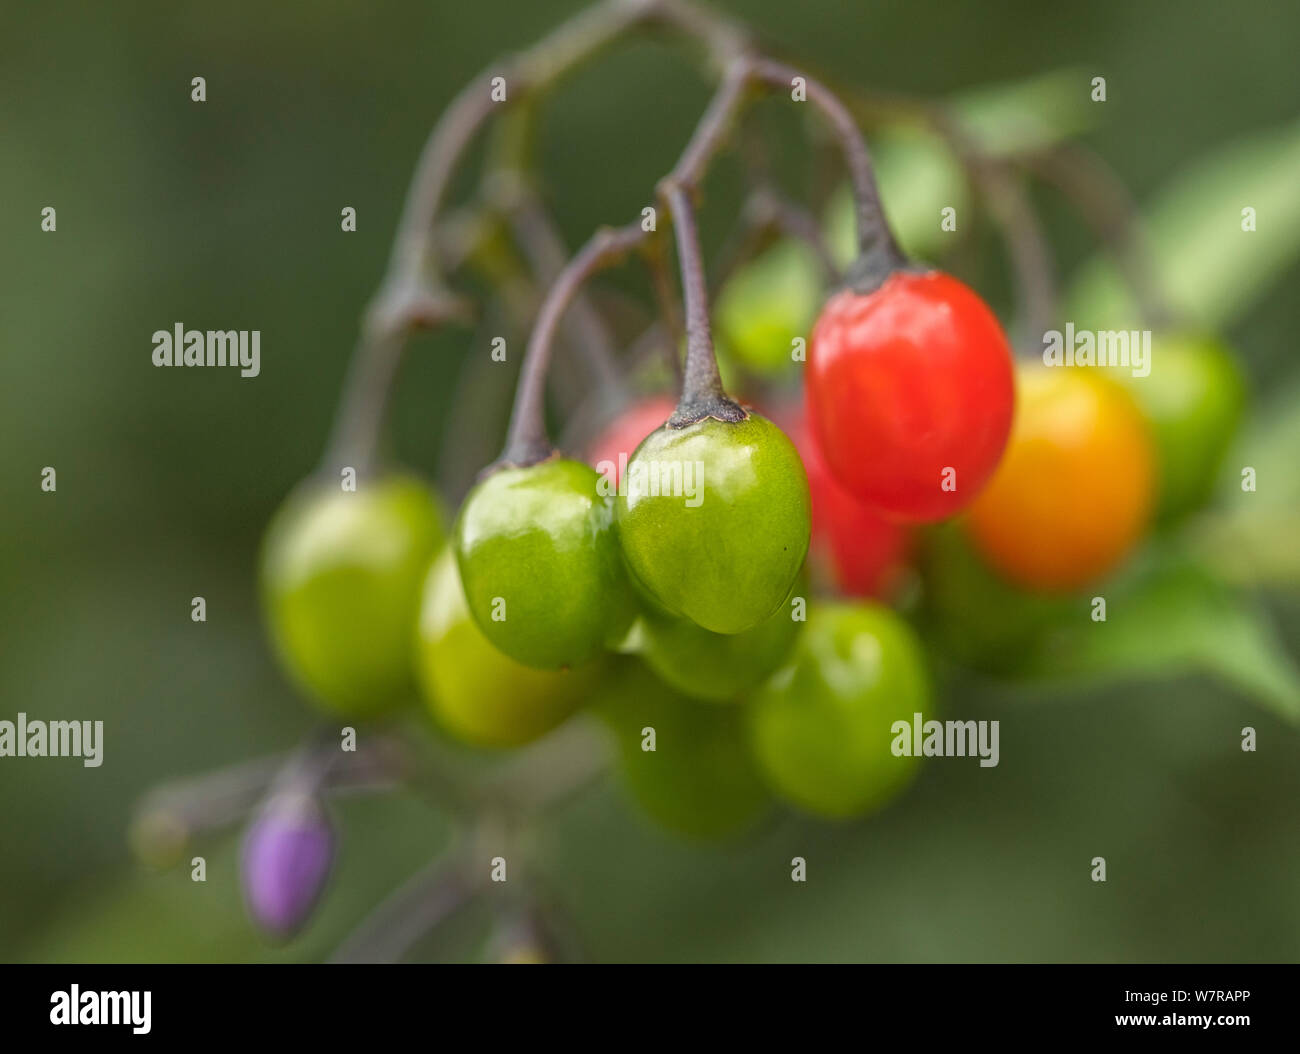 Ripening poisonous berries of Solanum dulcamara - Bittersweet / Woody Nightshade. Once used as a medicinal plant in herbal remedies. Stock Photo